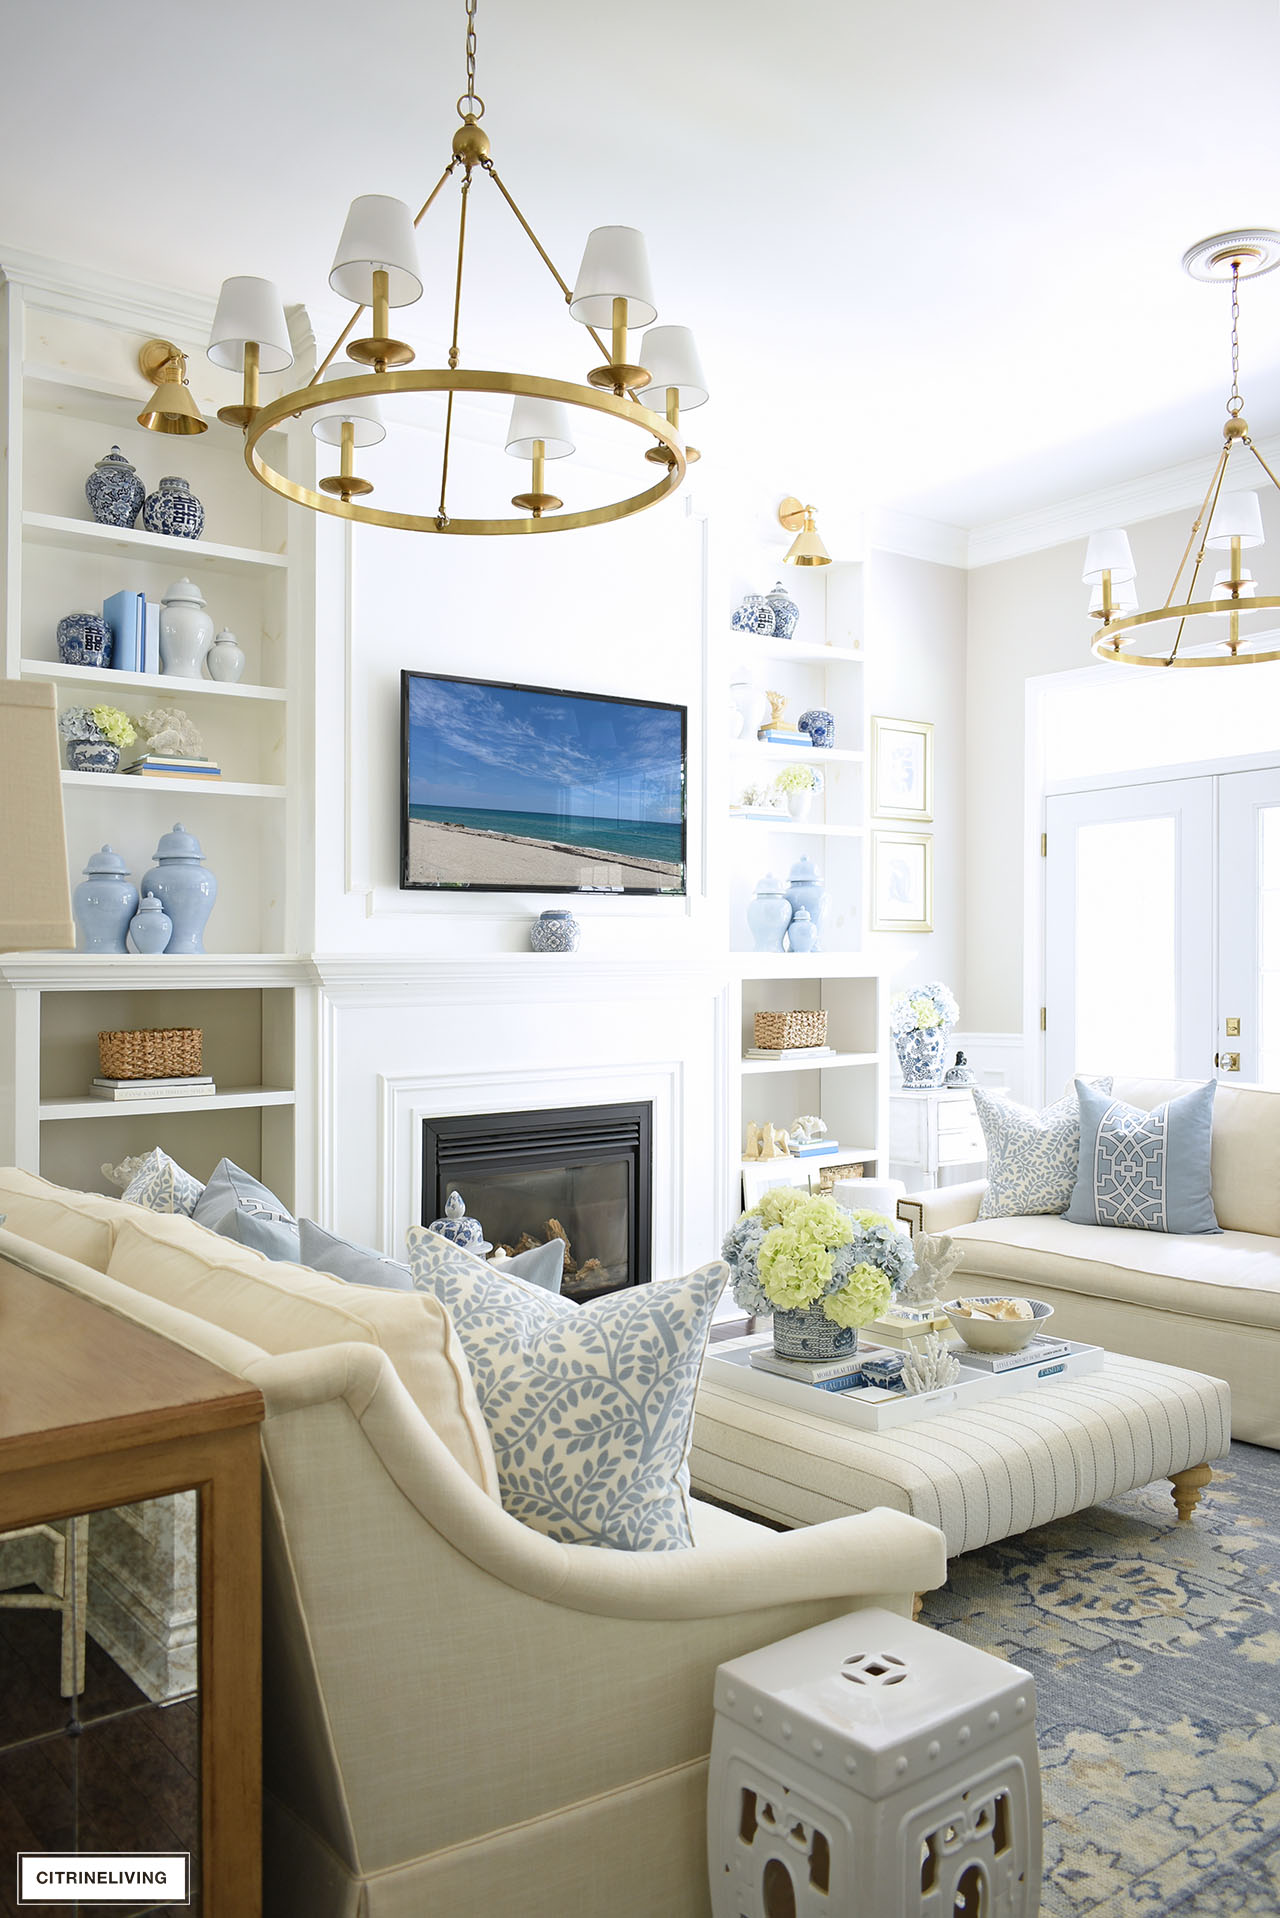 Living room with beautiful ceiling height bookshelves decorated for summer with a soft blue and white color palette, ginger jars, baskets, and blue and green hydrangeas.